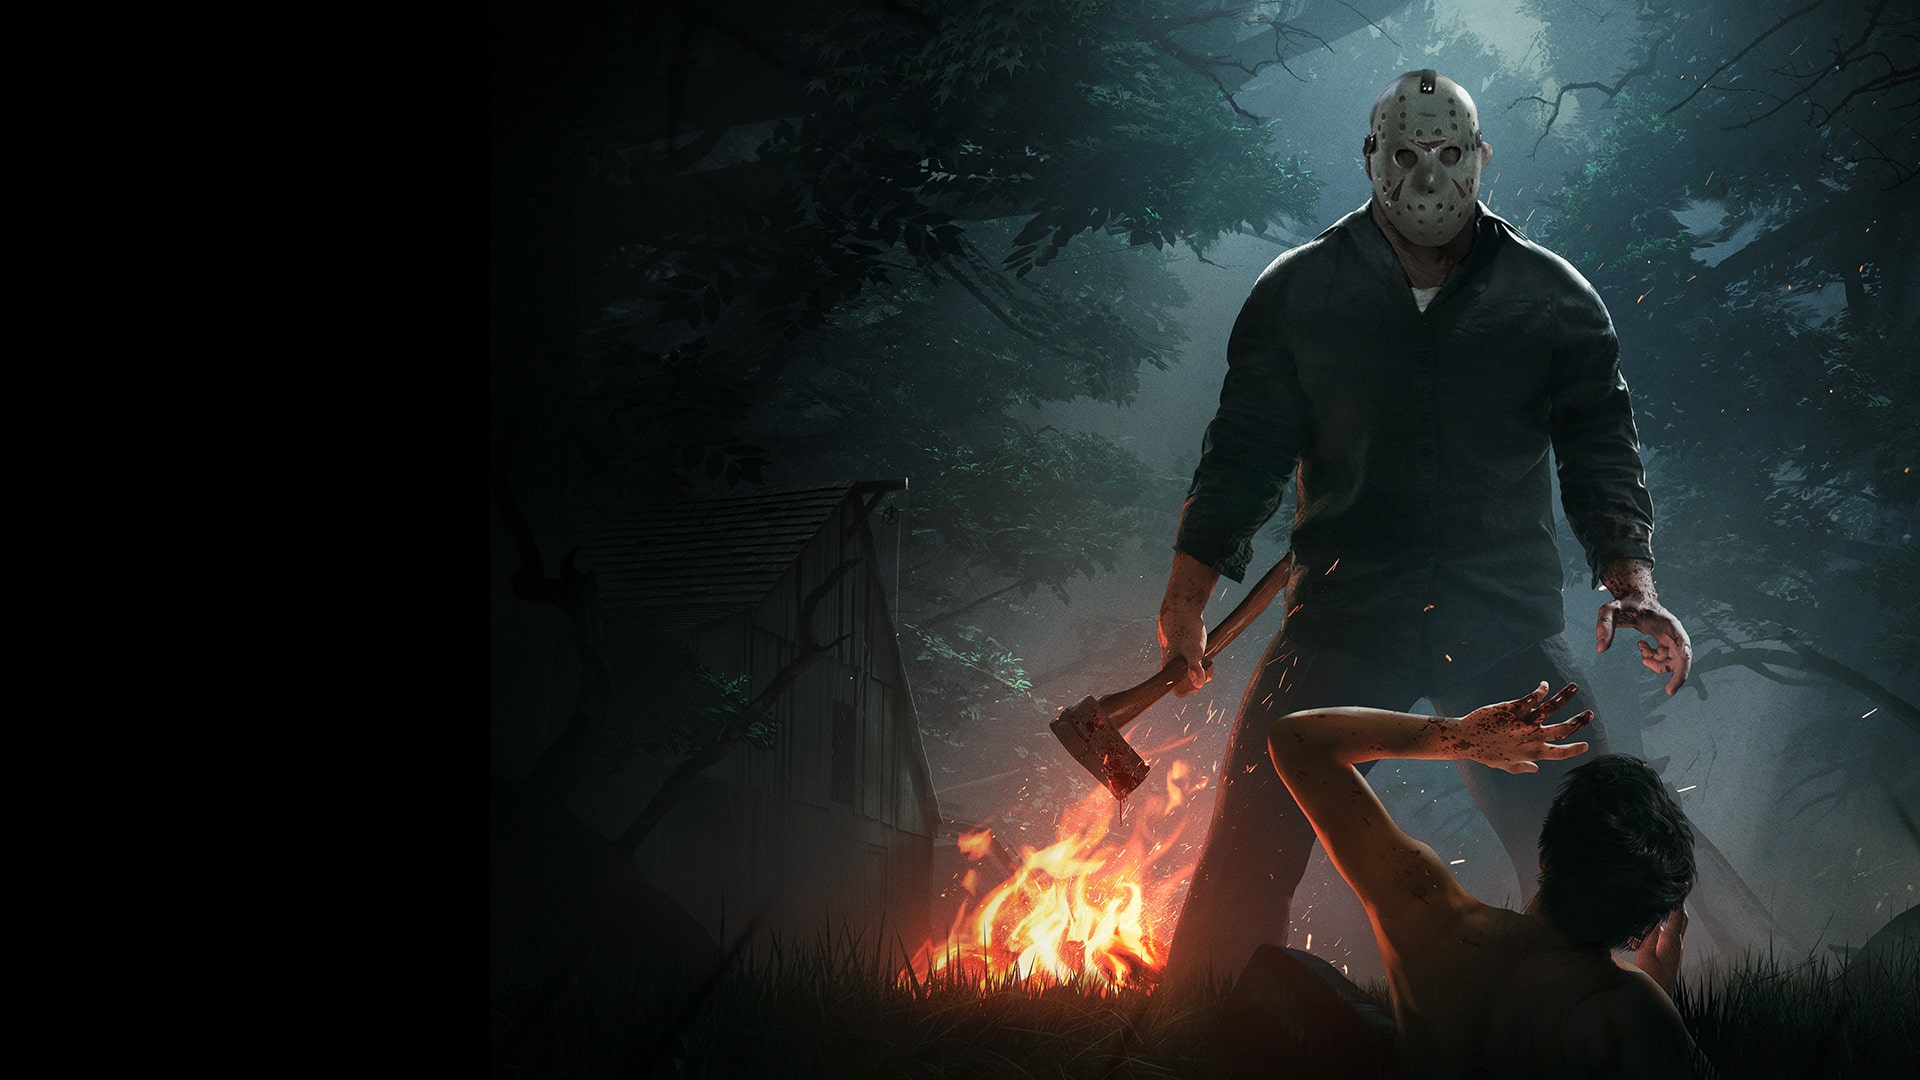 Friday the 13th: The Game - PlayStation 4 | PlayStation 4 | GameStop